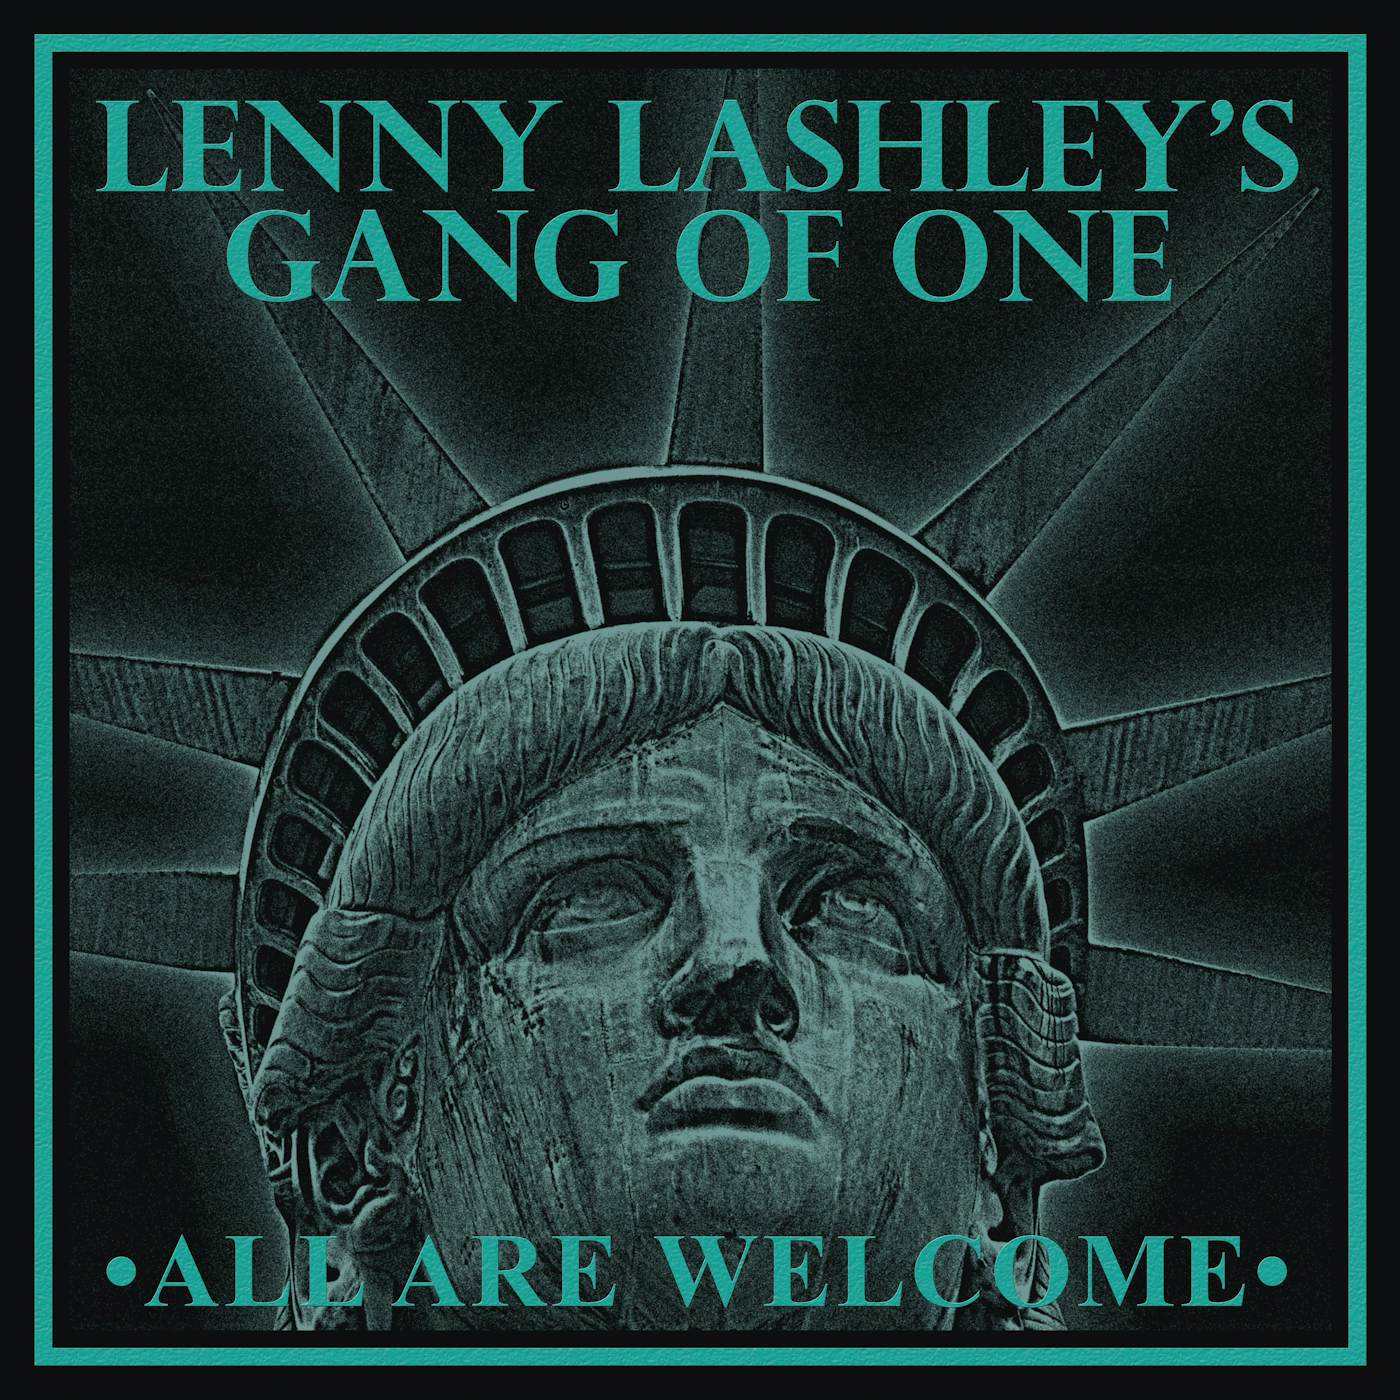 Lenny Lashley's Gang of One - All Are Welcome LP / CD (Vinyl)